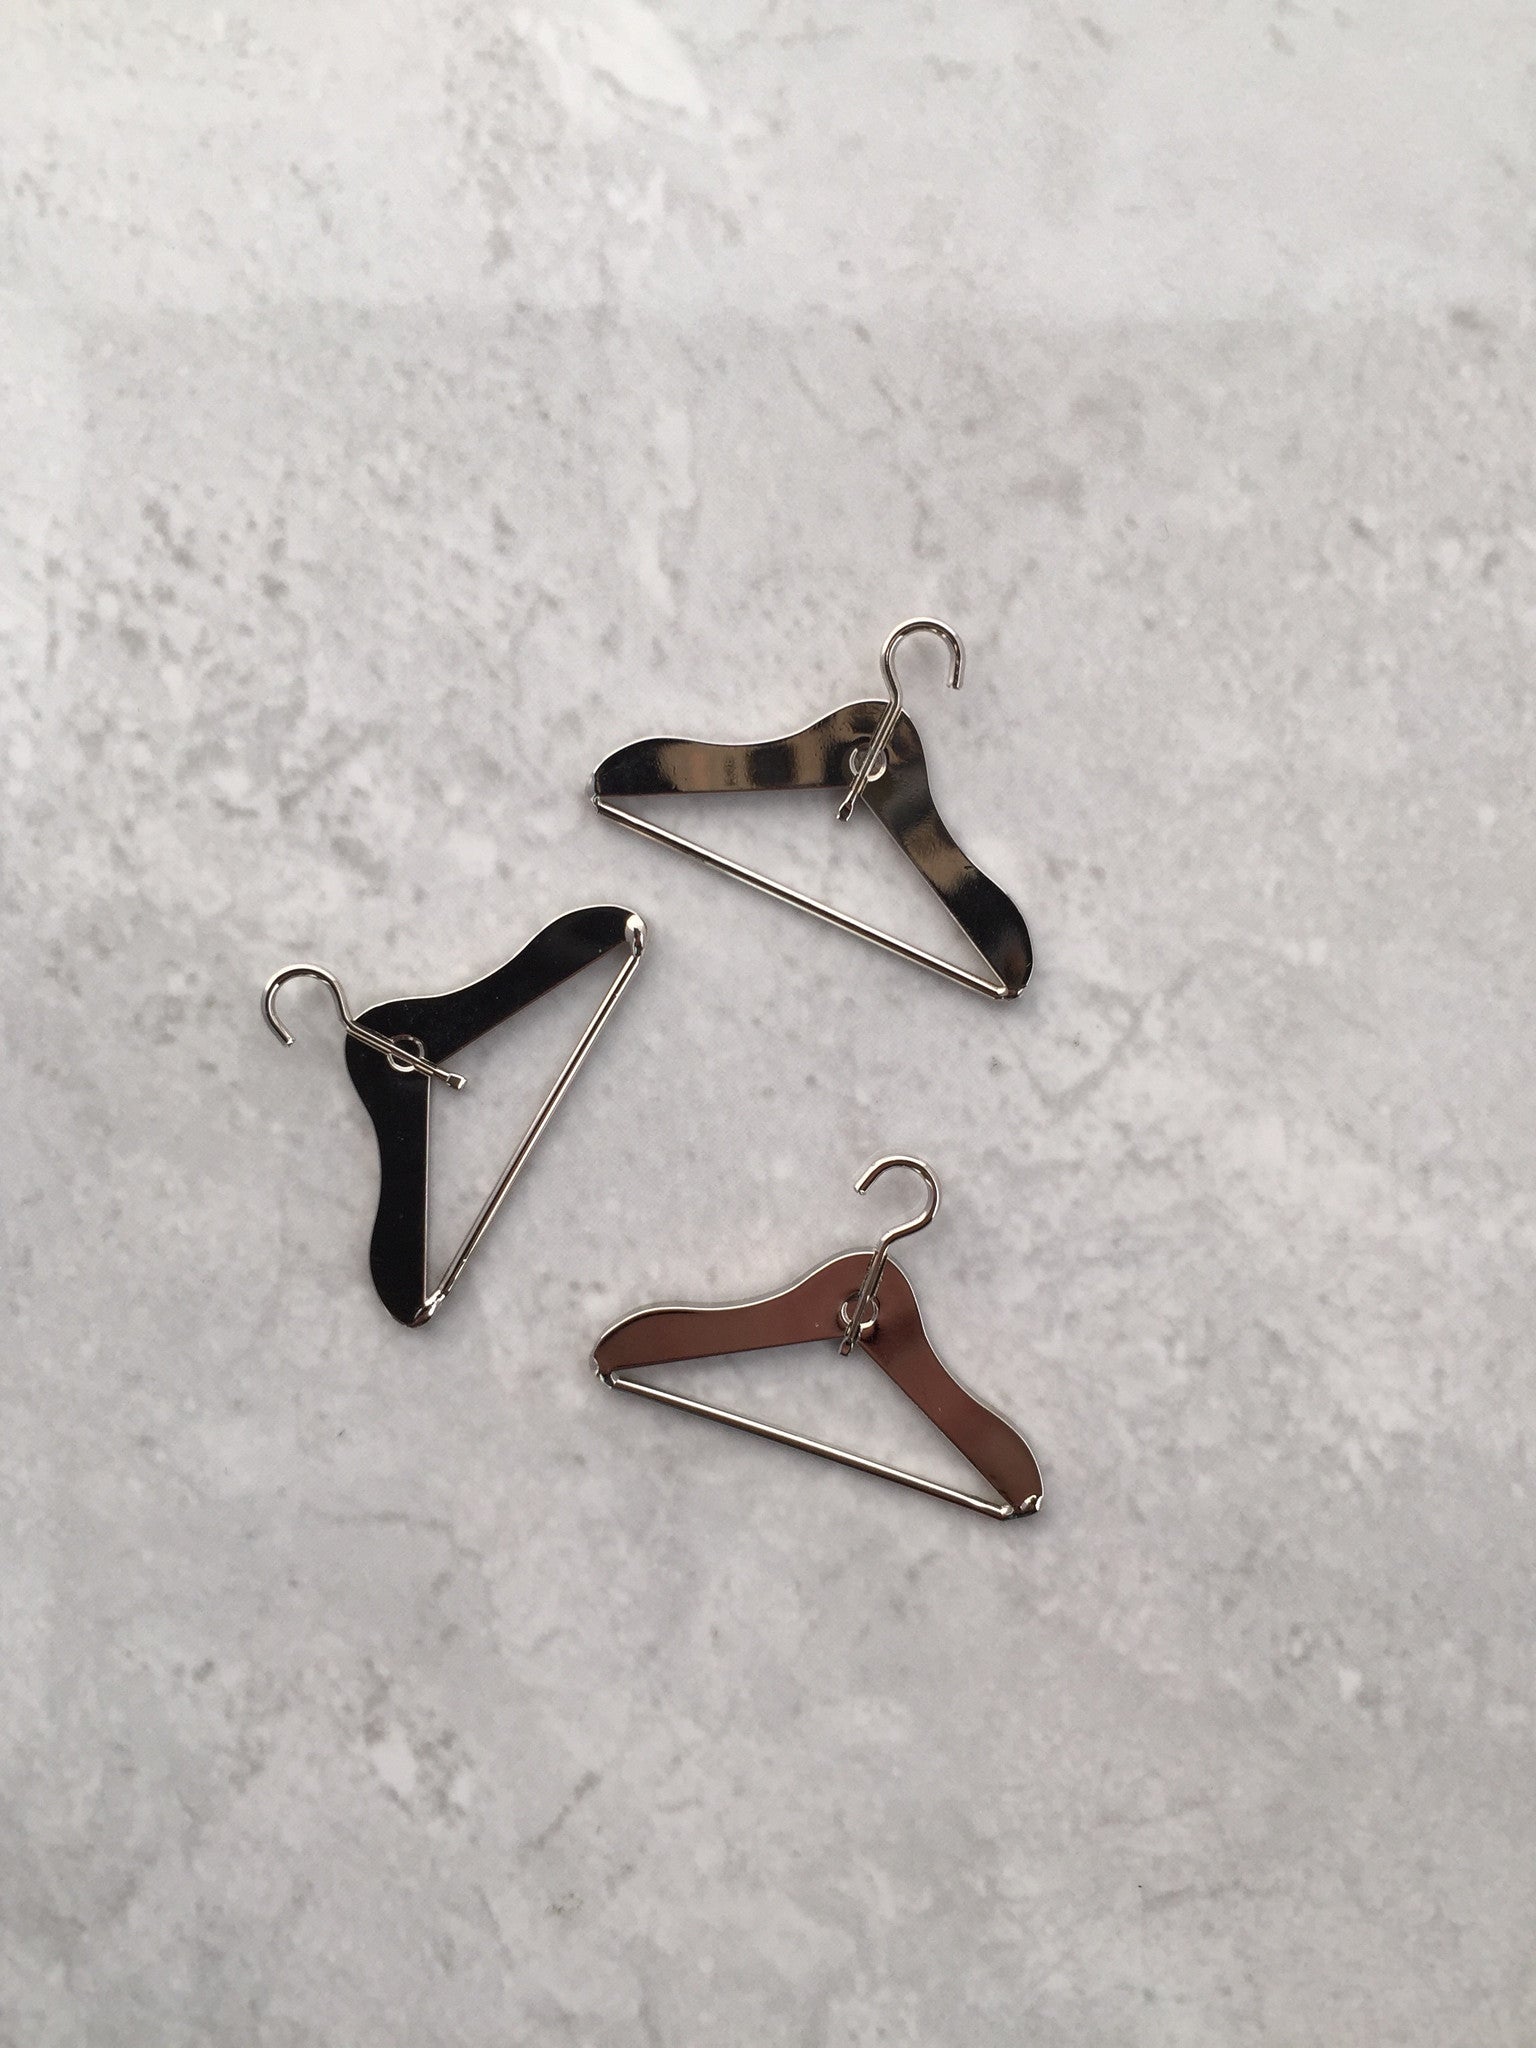 Miniature Clothes Hangers - 3 Pack – A WeeBitTeeny Modern Mini's